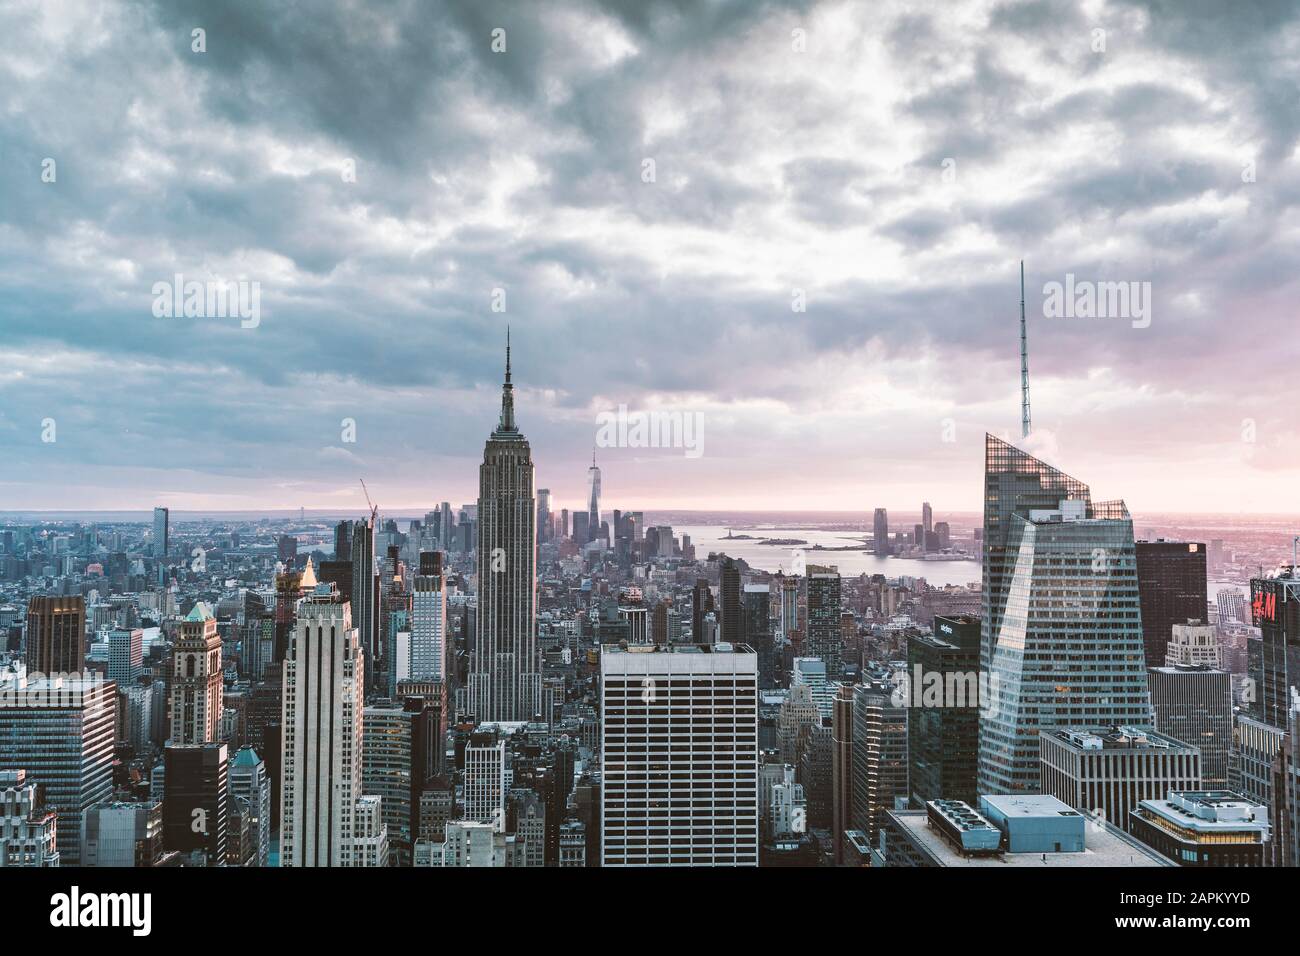 USA, New York, Aerial view of New York city skyscrapers with Empire State Building Stock Photo